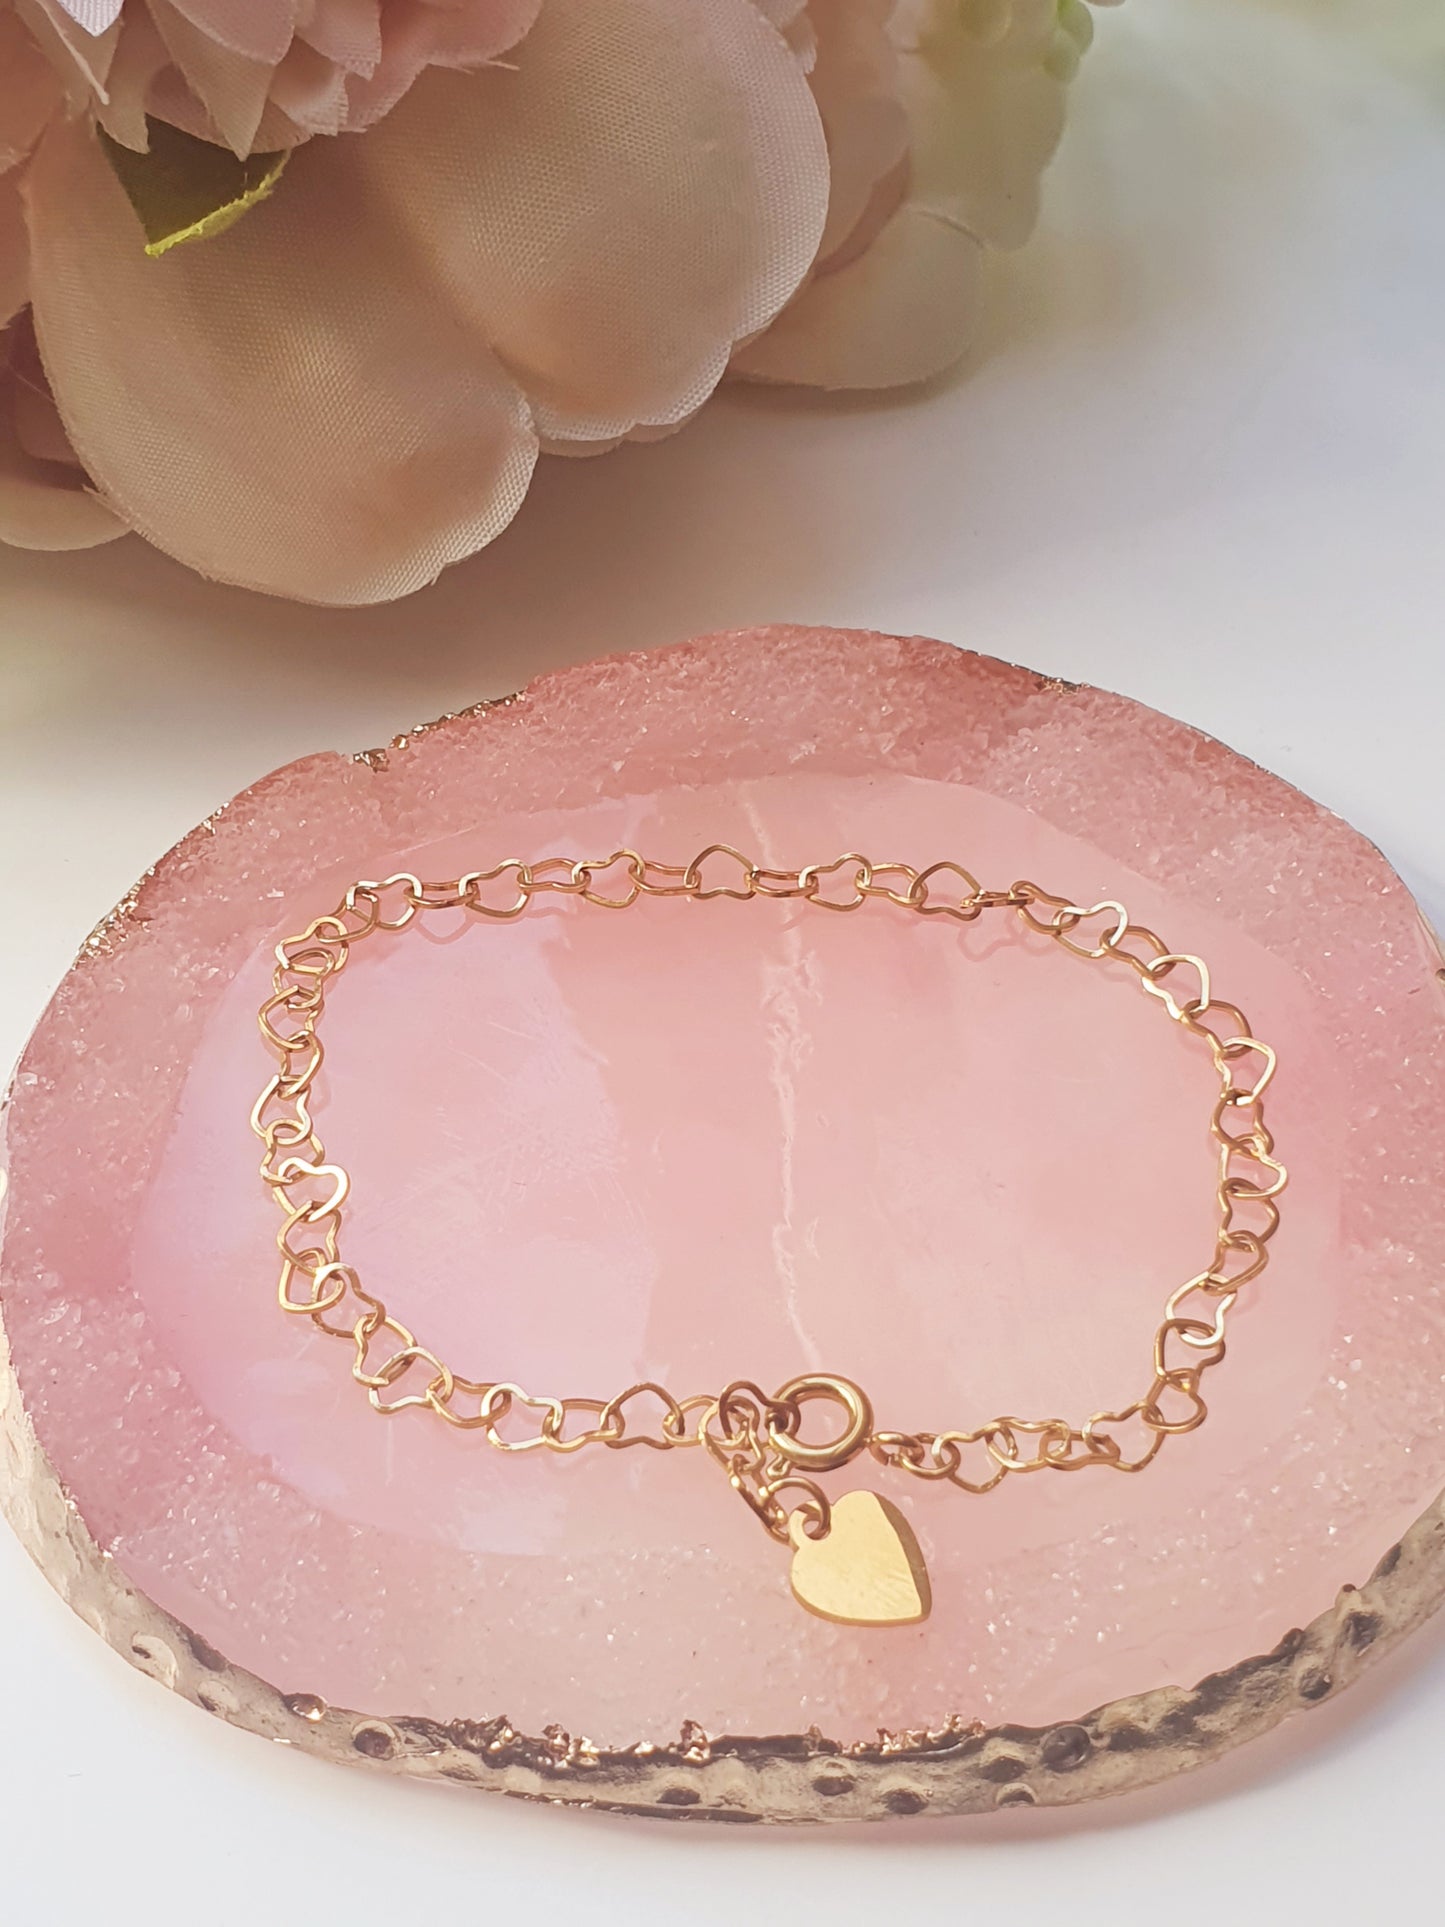 Gold bracelet made up of heart shaped links and fastened with a spring loaded clasp, resting on pink agate